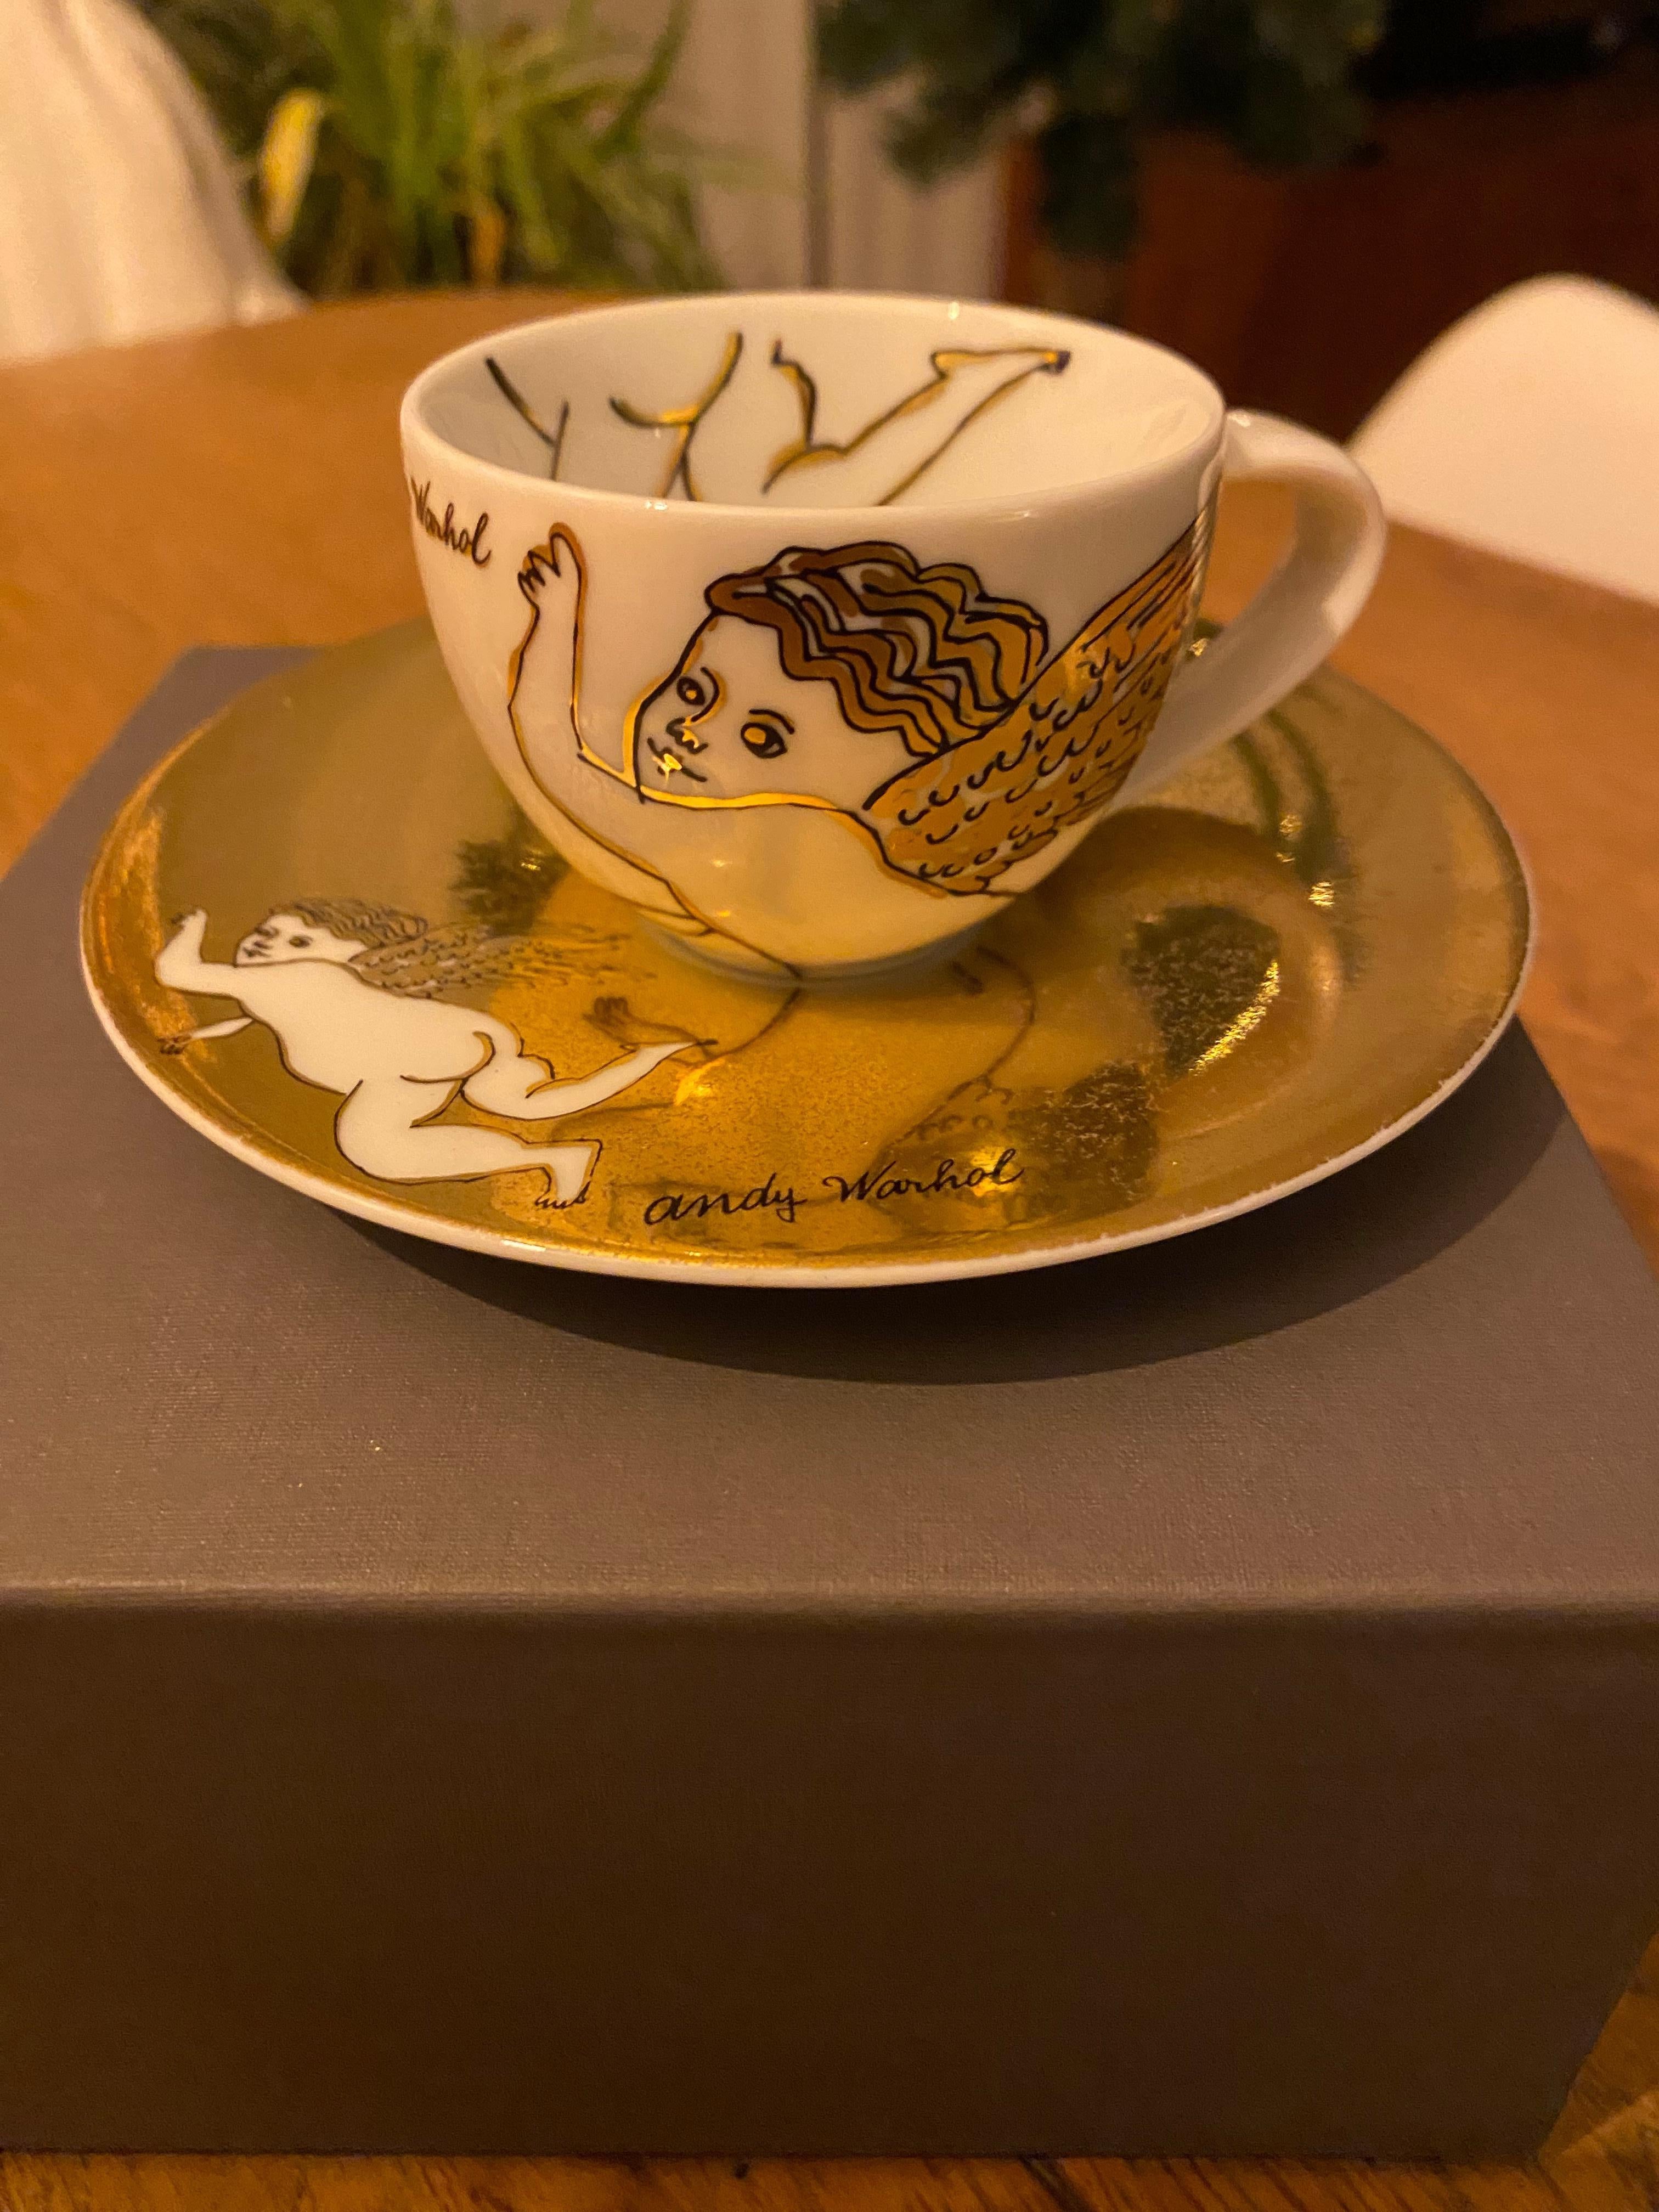 Rosenthal Studio-Line Andy Warhol christmas golden Angels espresso cup with saucer. Andy Warhol, quite possibly the greatest pop artist of our time, loved Christmas and was known for giving his friends paintings of cupids as gifts. These particular